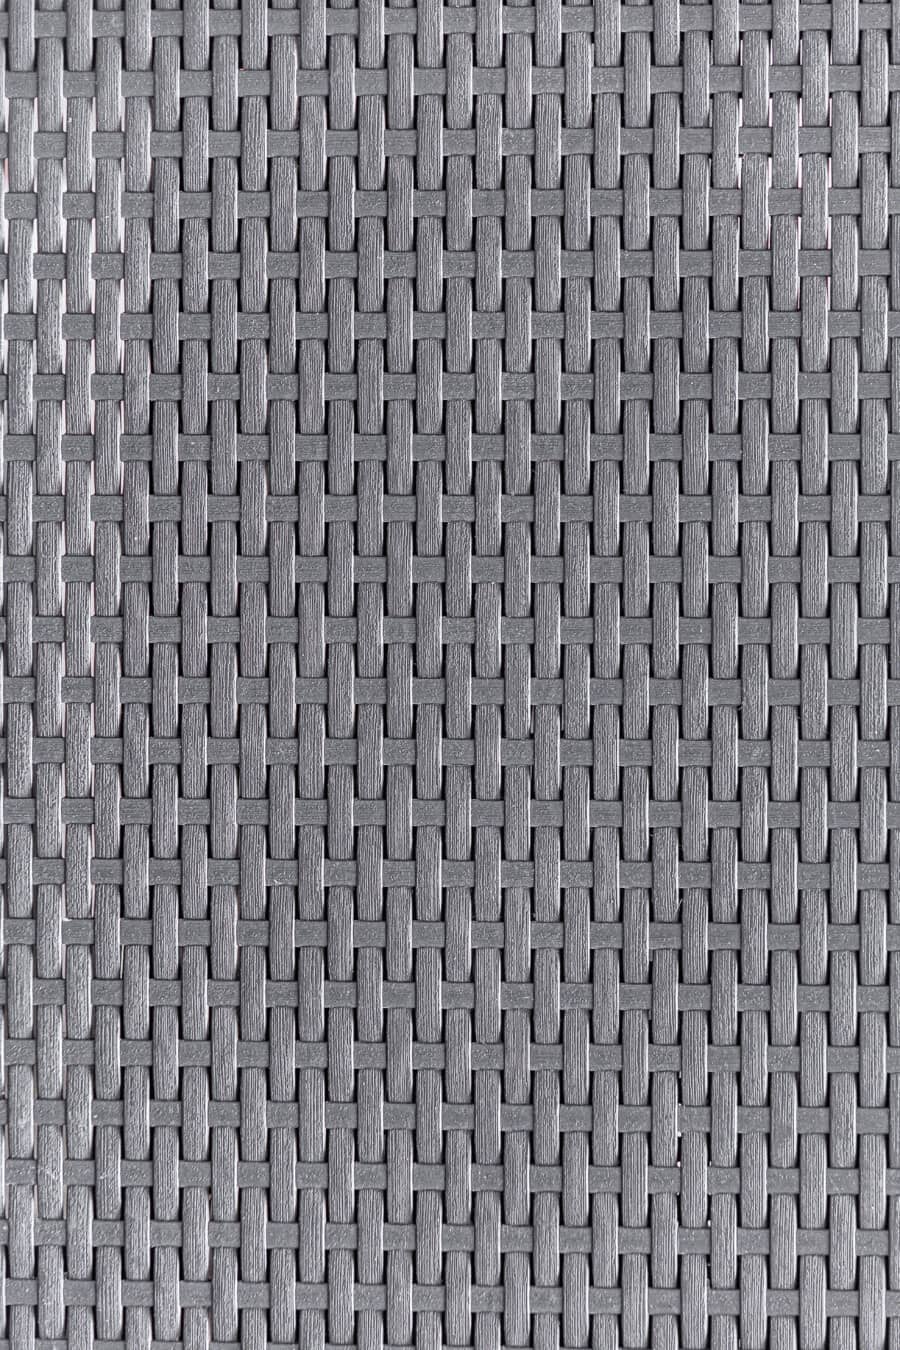 grey, texture, plastic, wicker basket, material, abstract, surface, pattern, rough, gray